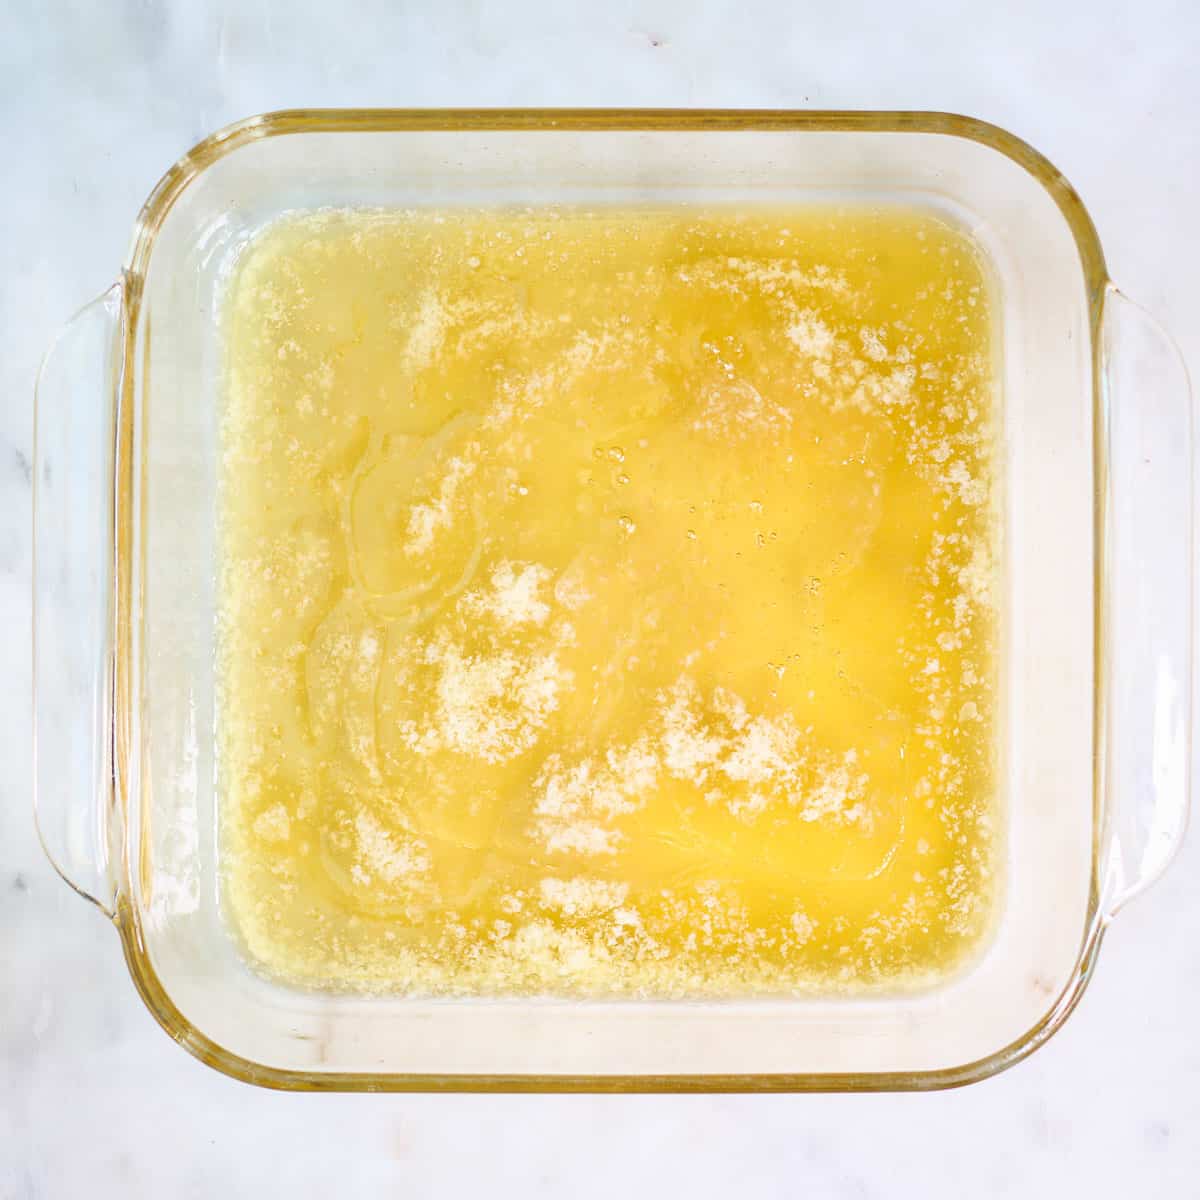 Honey on top of melted butter in pyrex baking dish.